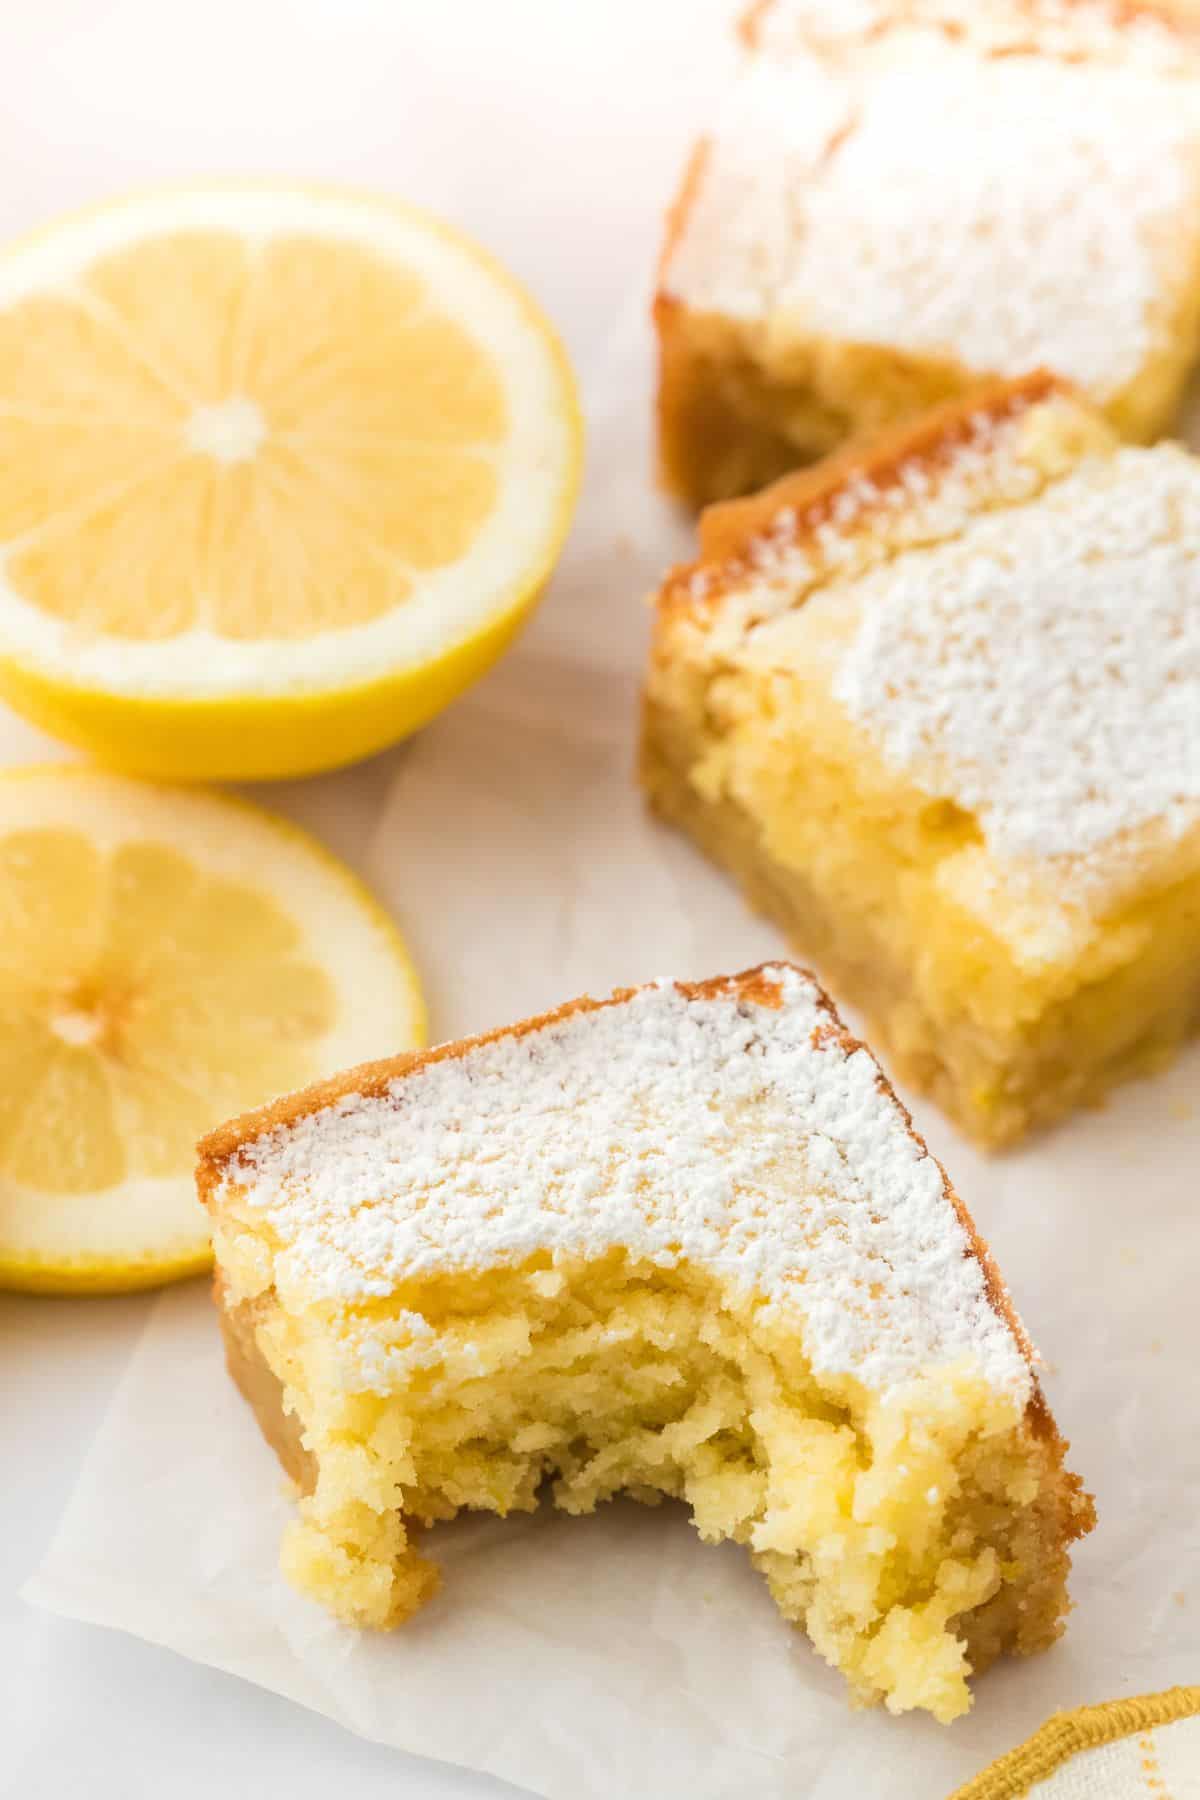 Lemon brownies cut into squares on the table with one in front missing a bite.